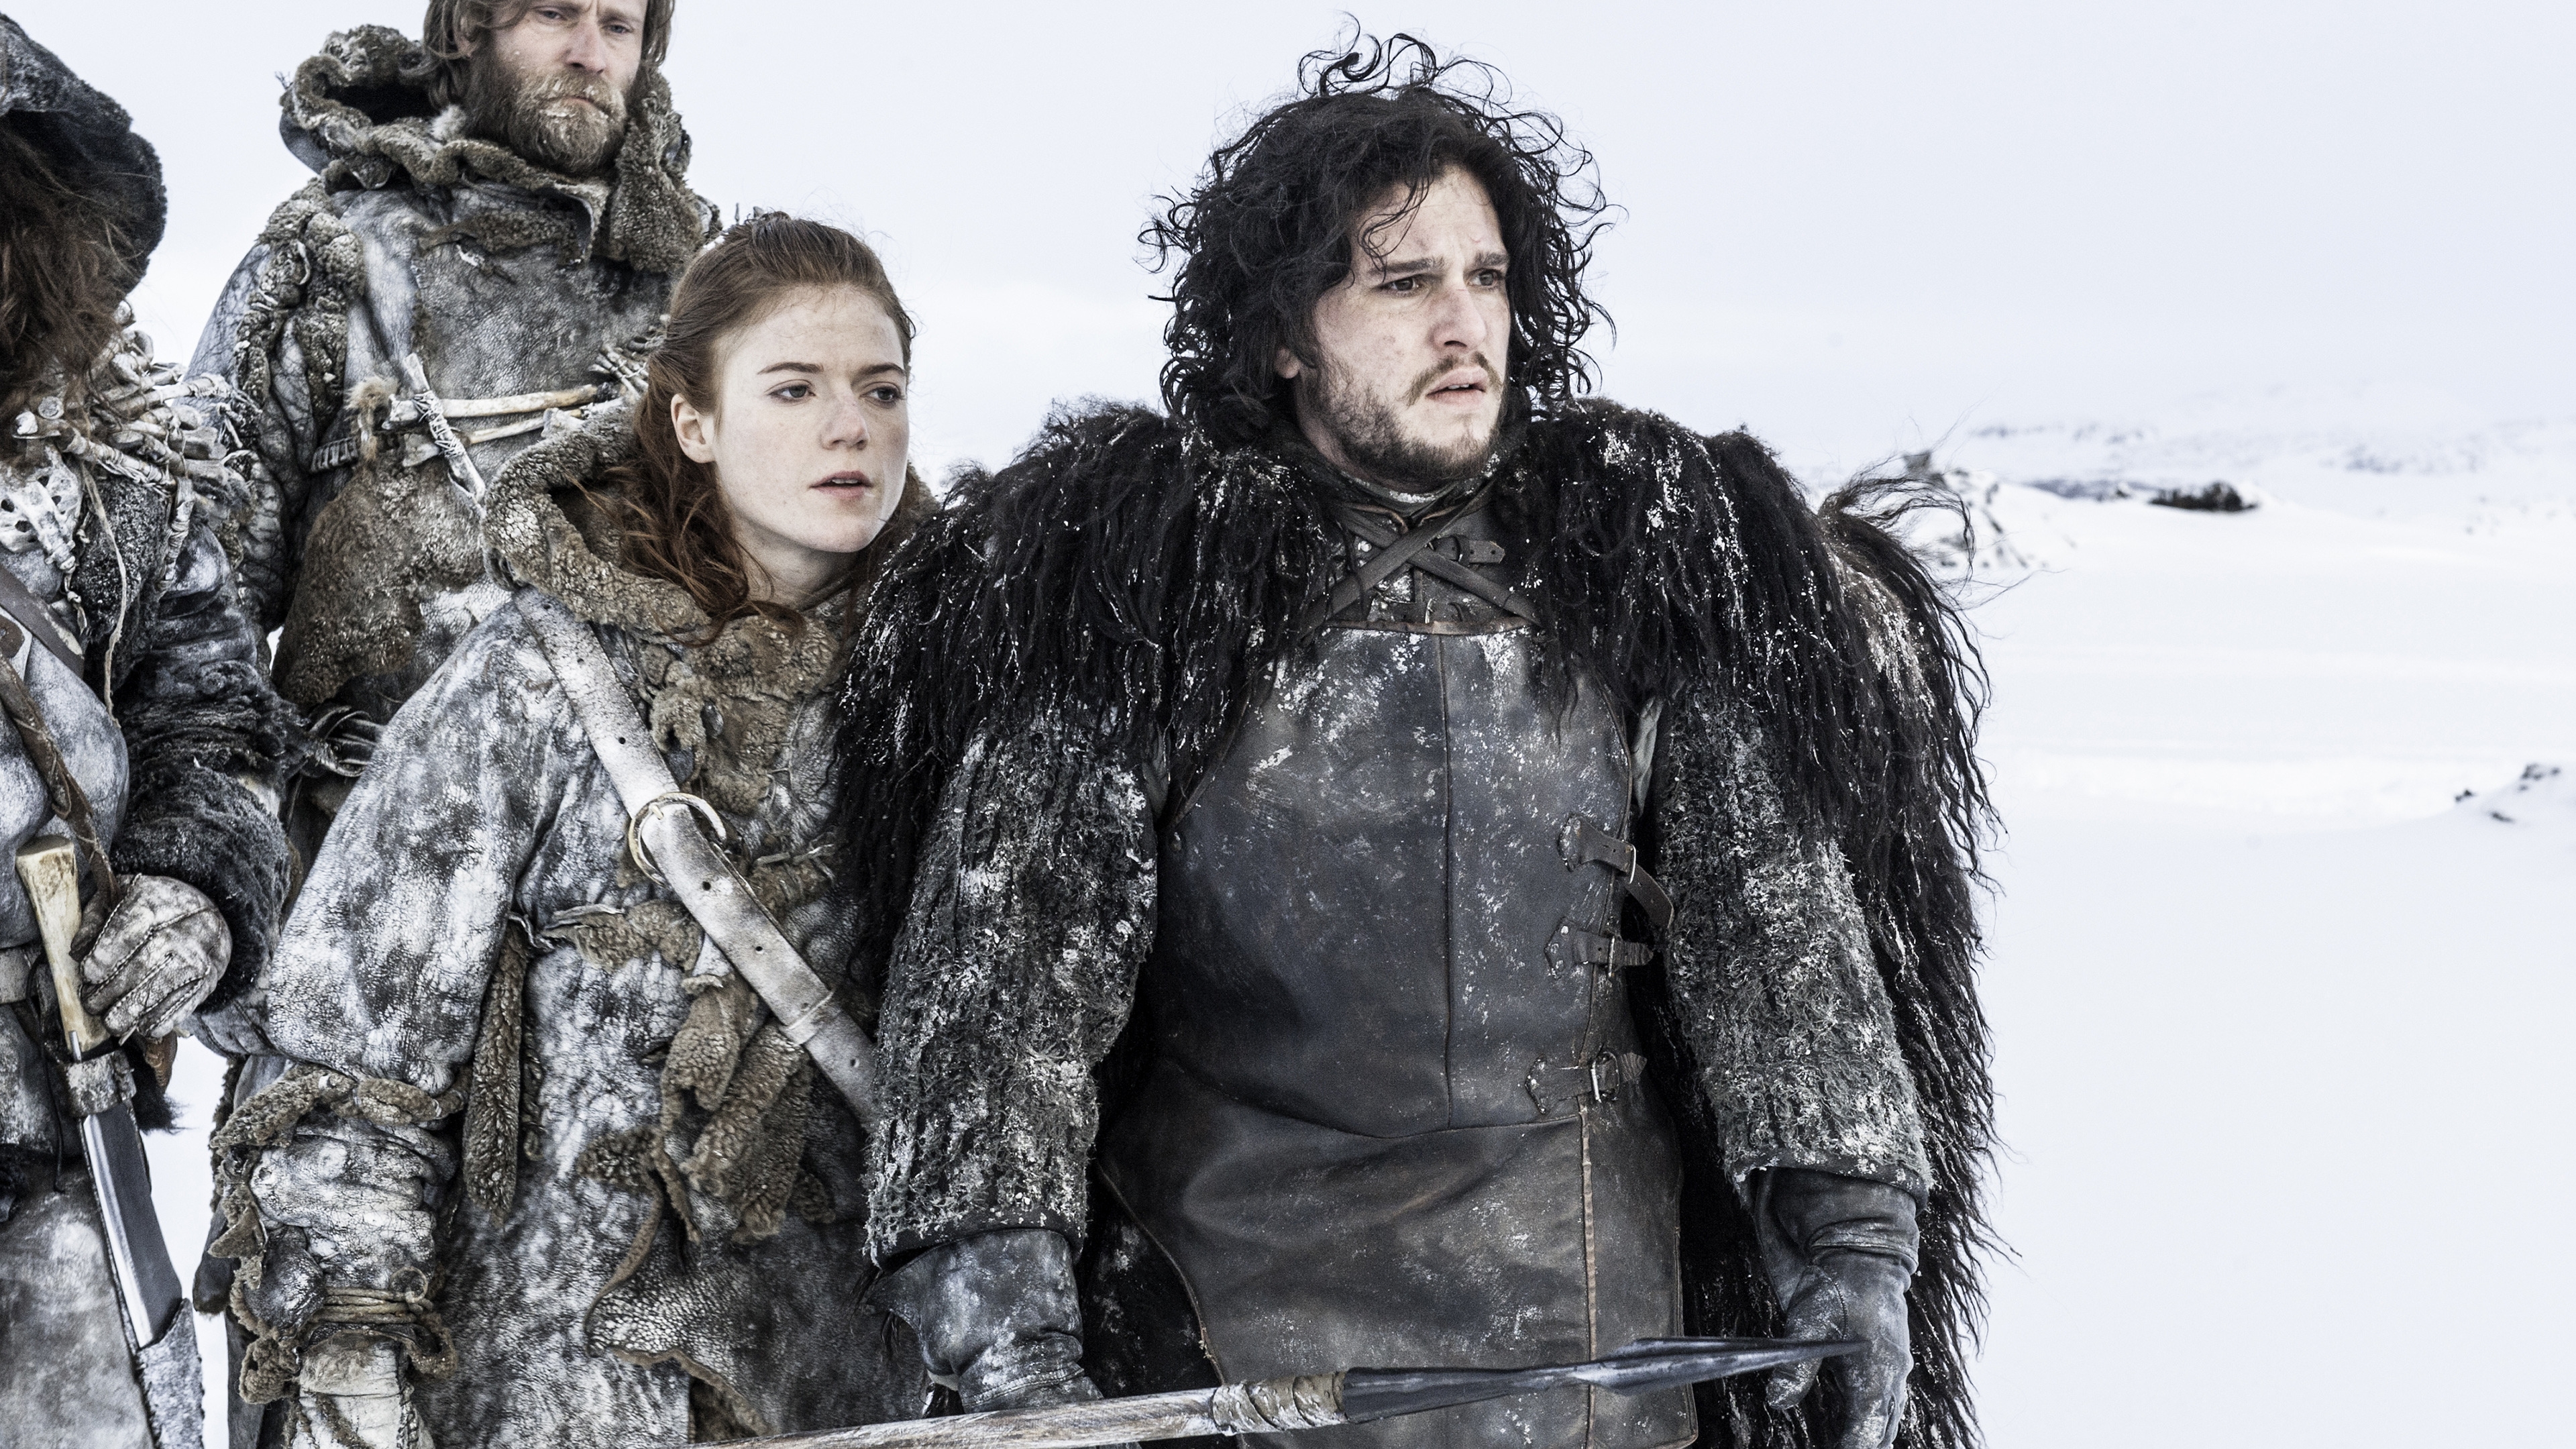 Jon Snow and Ygritte for 3840 x 2160 Ultra HD resolution